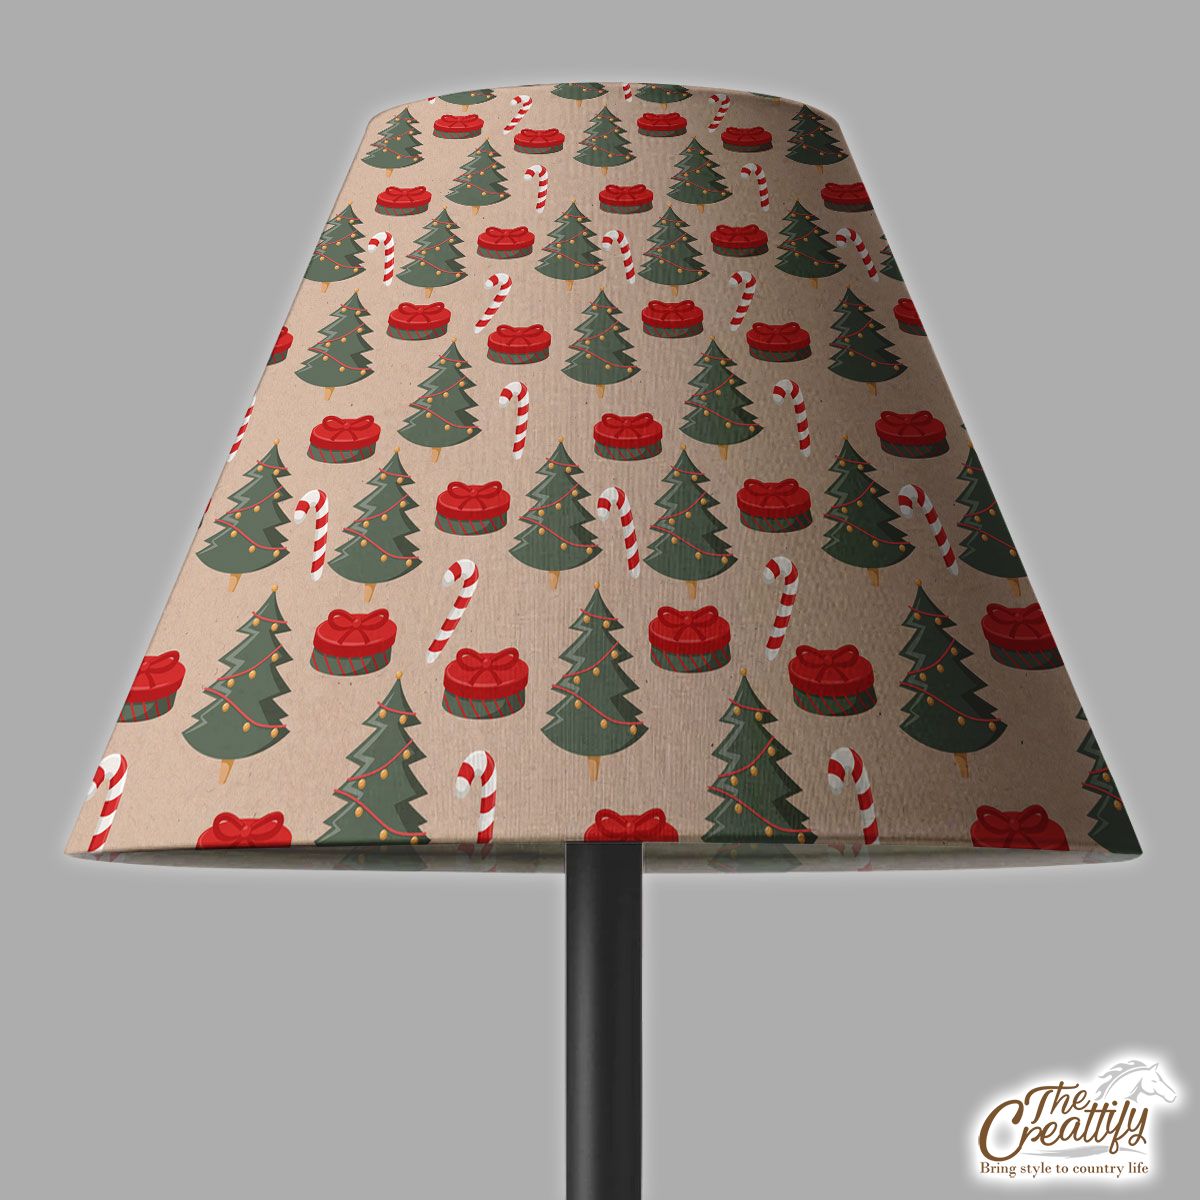 Christmas Tree, Christmas Gift, Candy Cane Lamp Cover